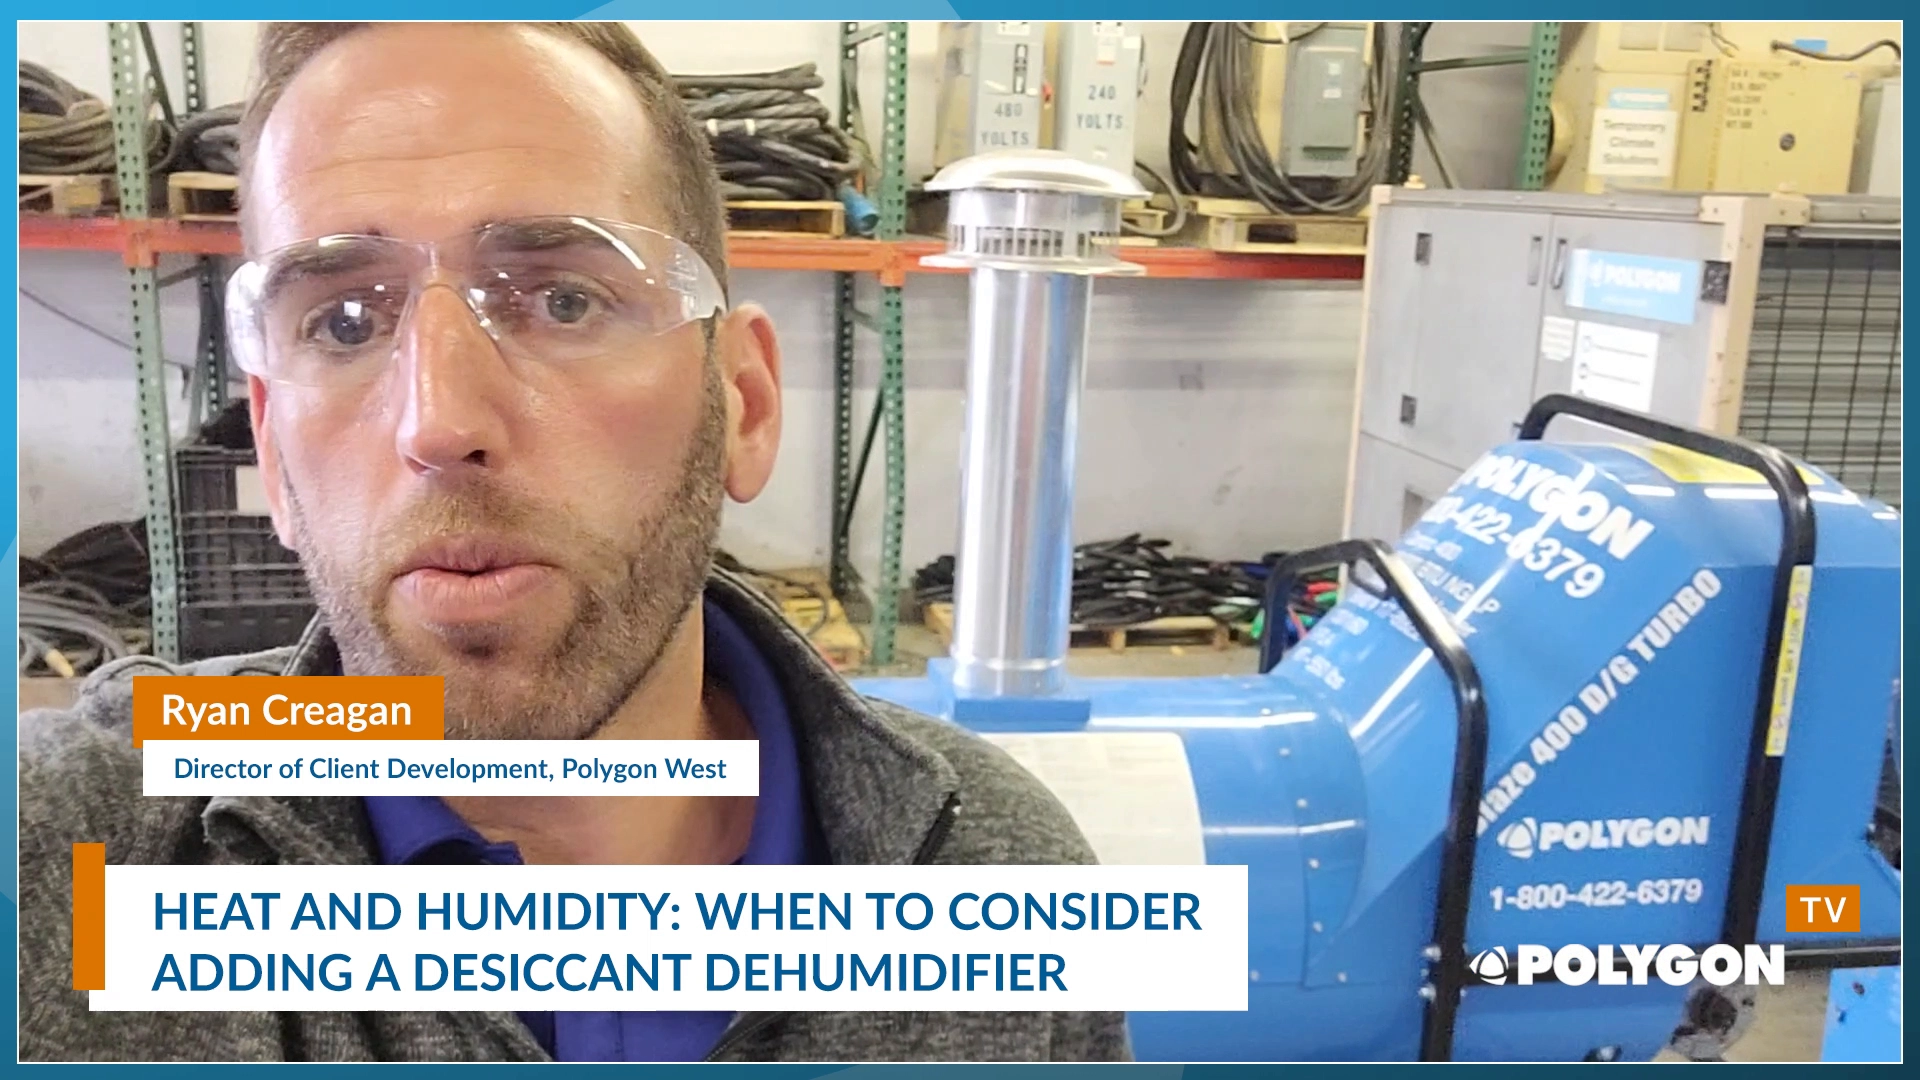 Heat and Humidity: When to Consider Adding a Desiccant Dehumidifier